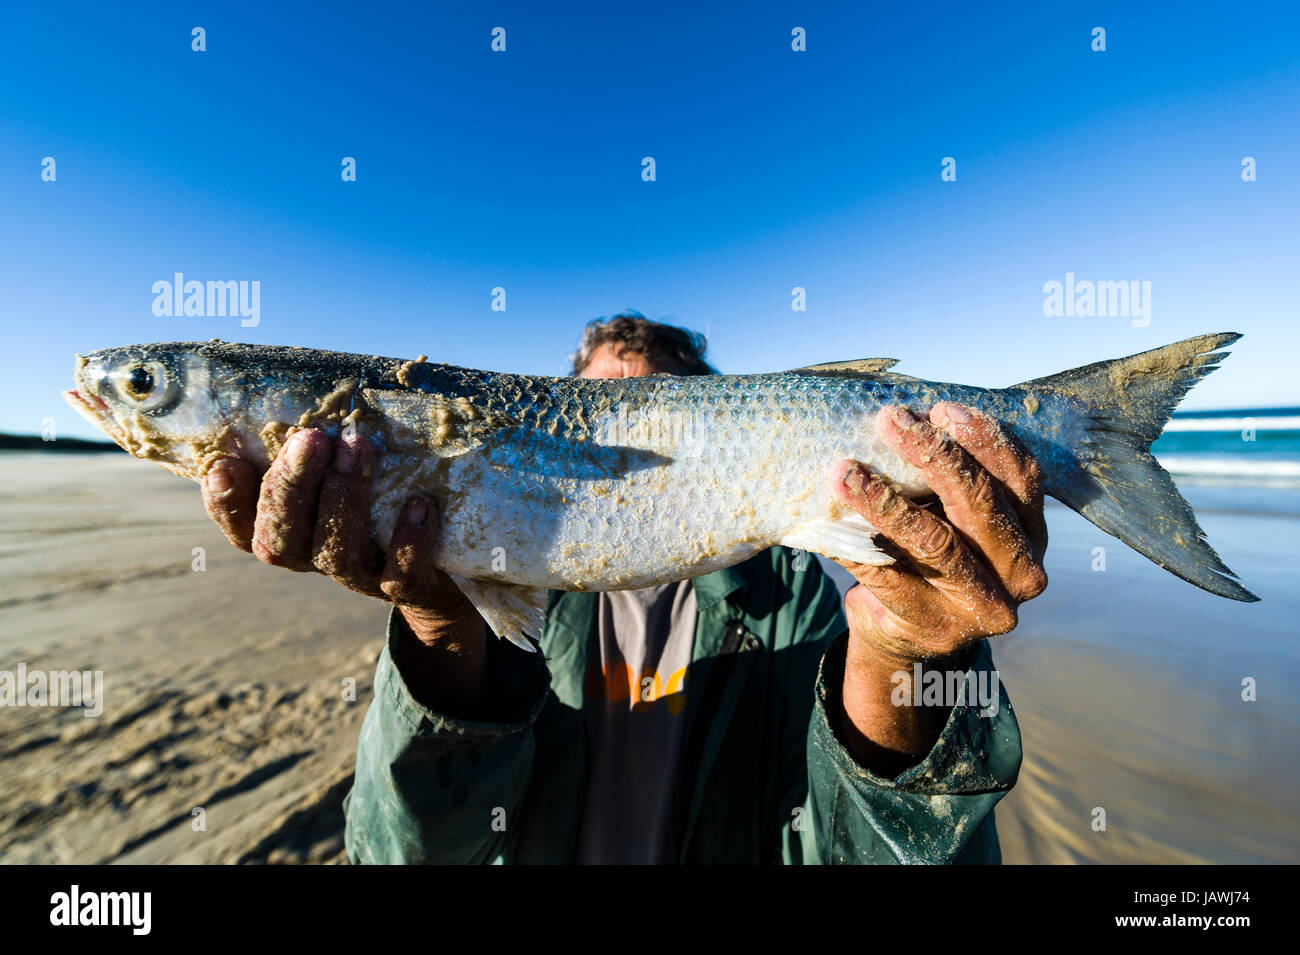 A fisherman proudly displays a Mullet he has caught. Stock Photo